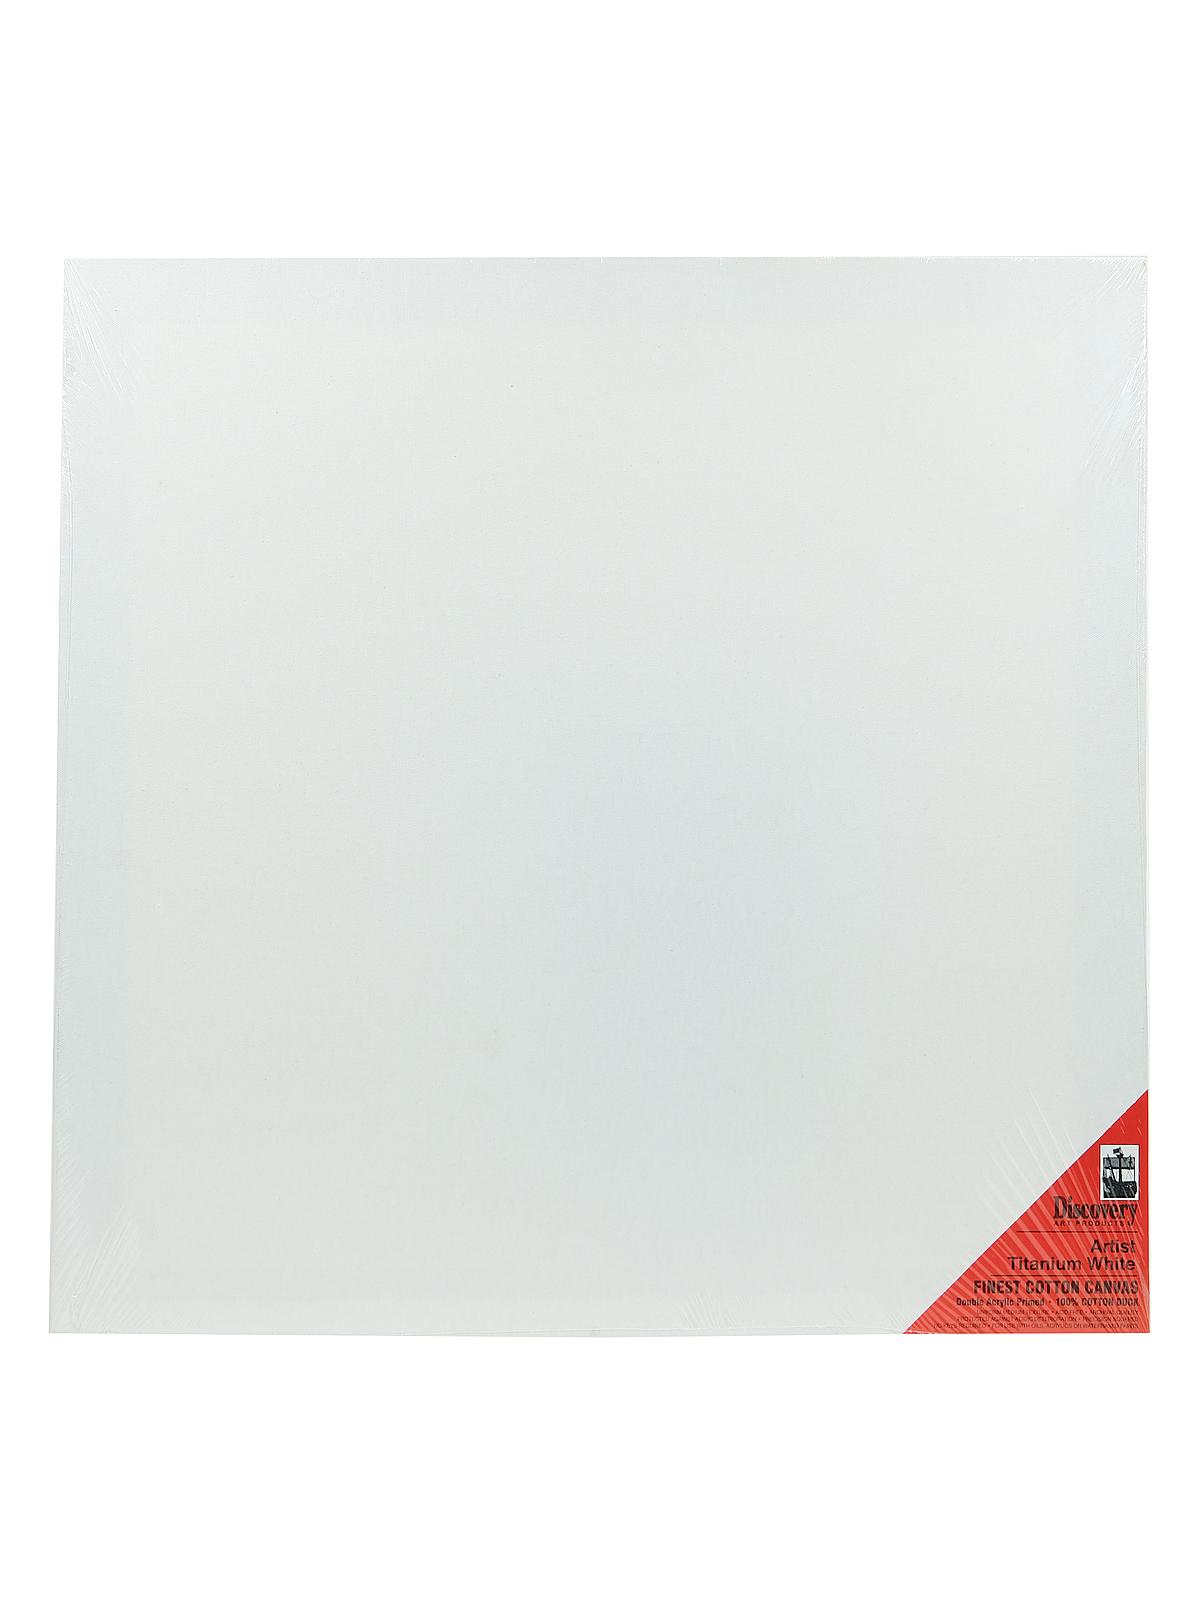 Finest Stretched Cotton Canvas White 24 In. X 24 In. Each